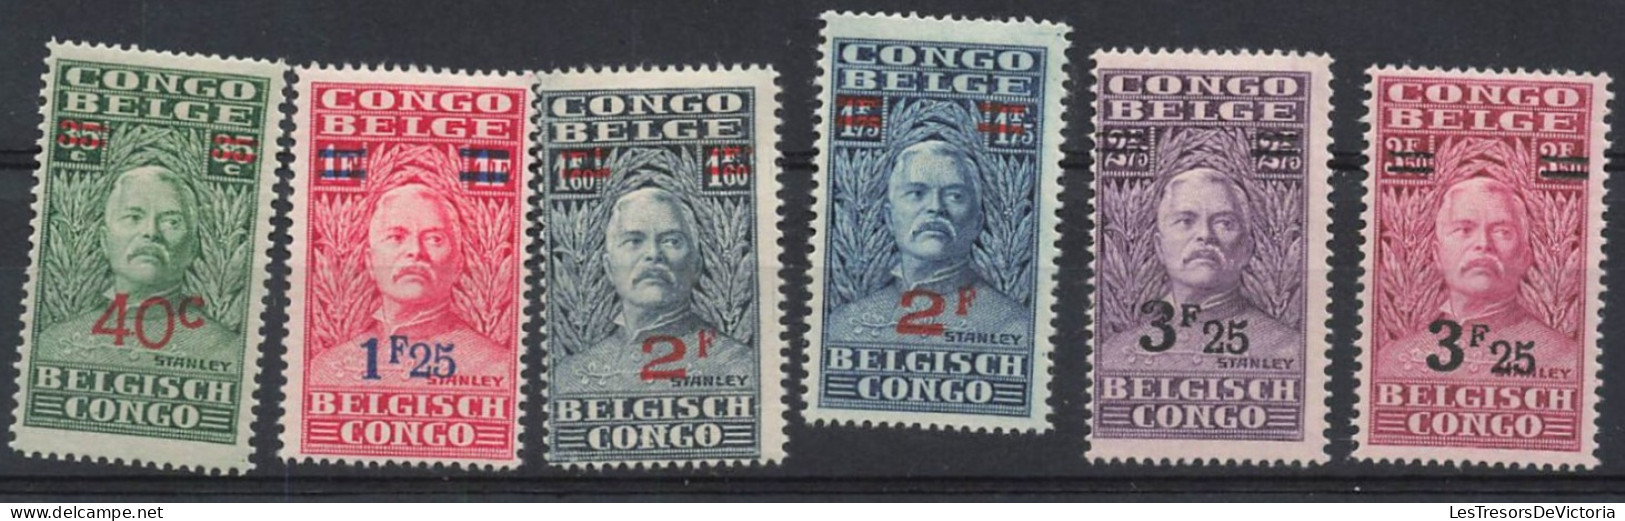 Congo Belge - 1931 - COB 162/67* - Timbres " Starley" Avec Surcharges - Cote 18 - Nuovi